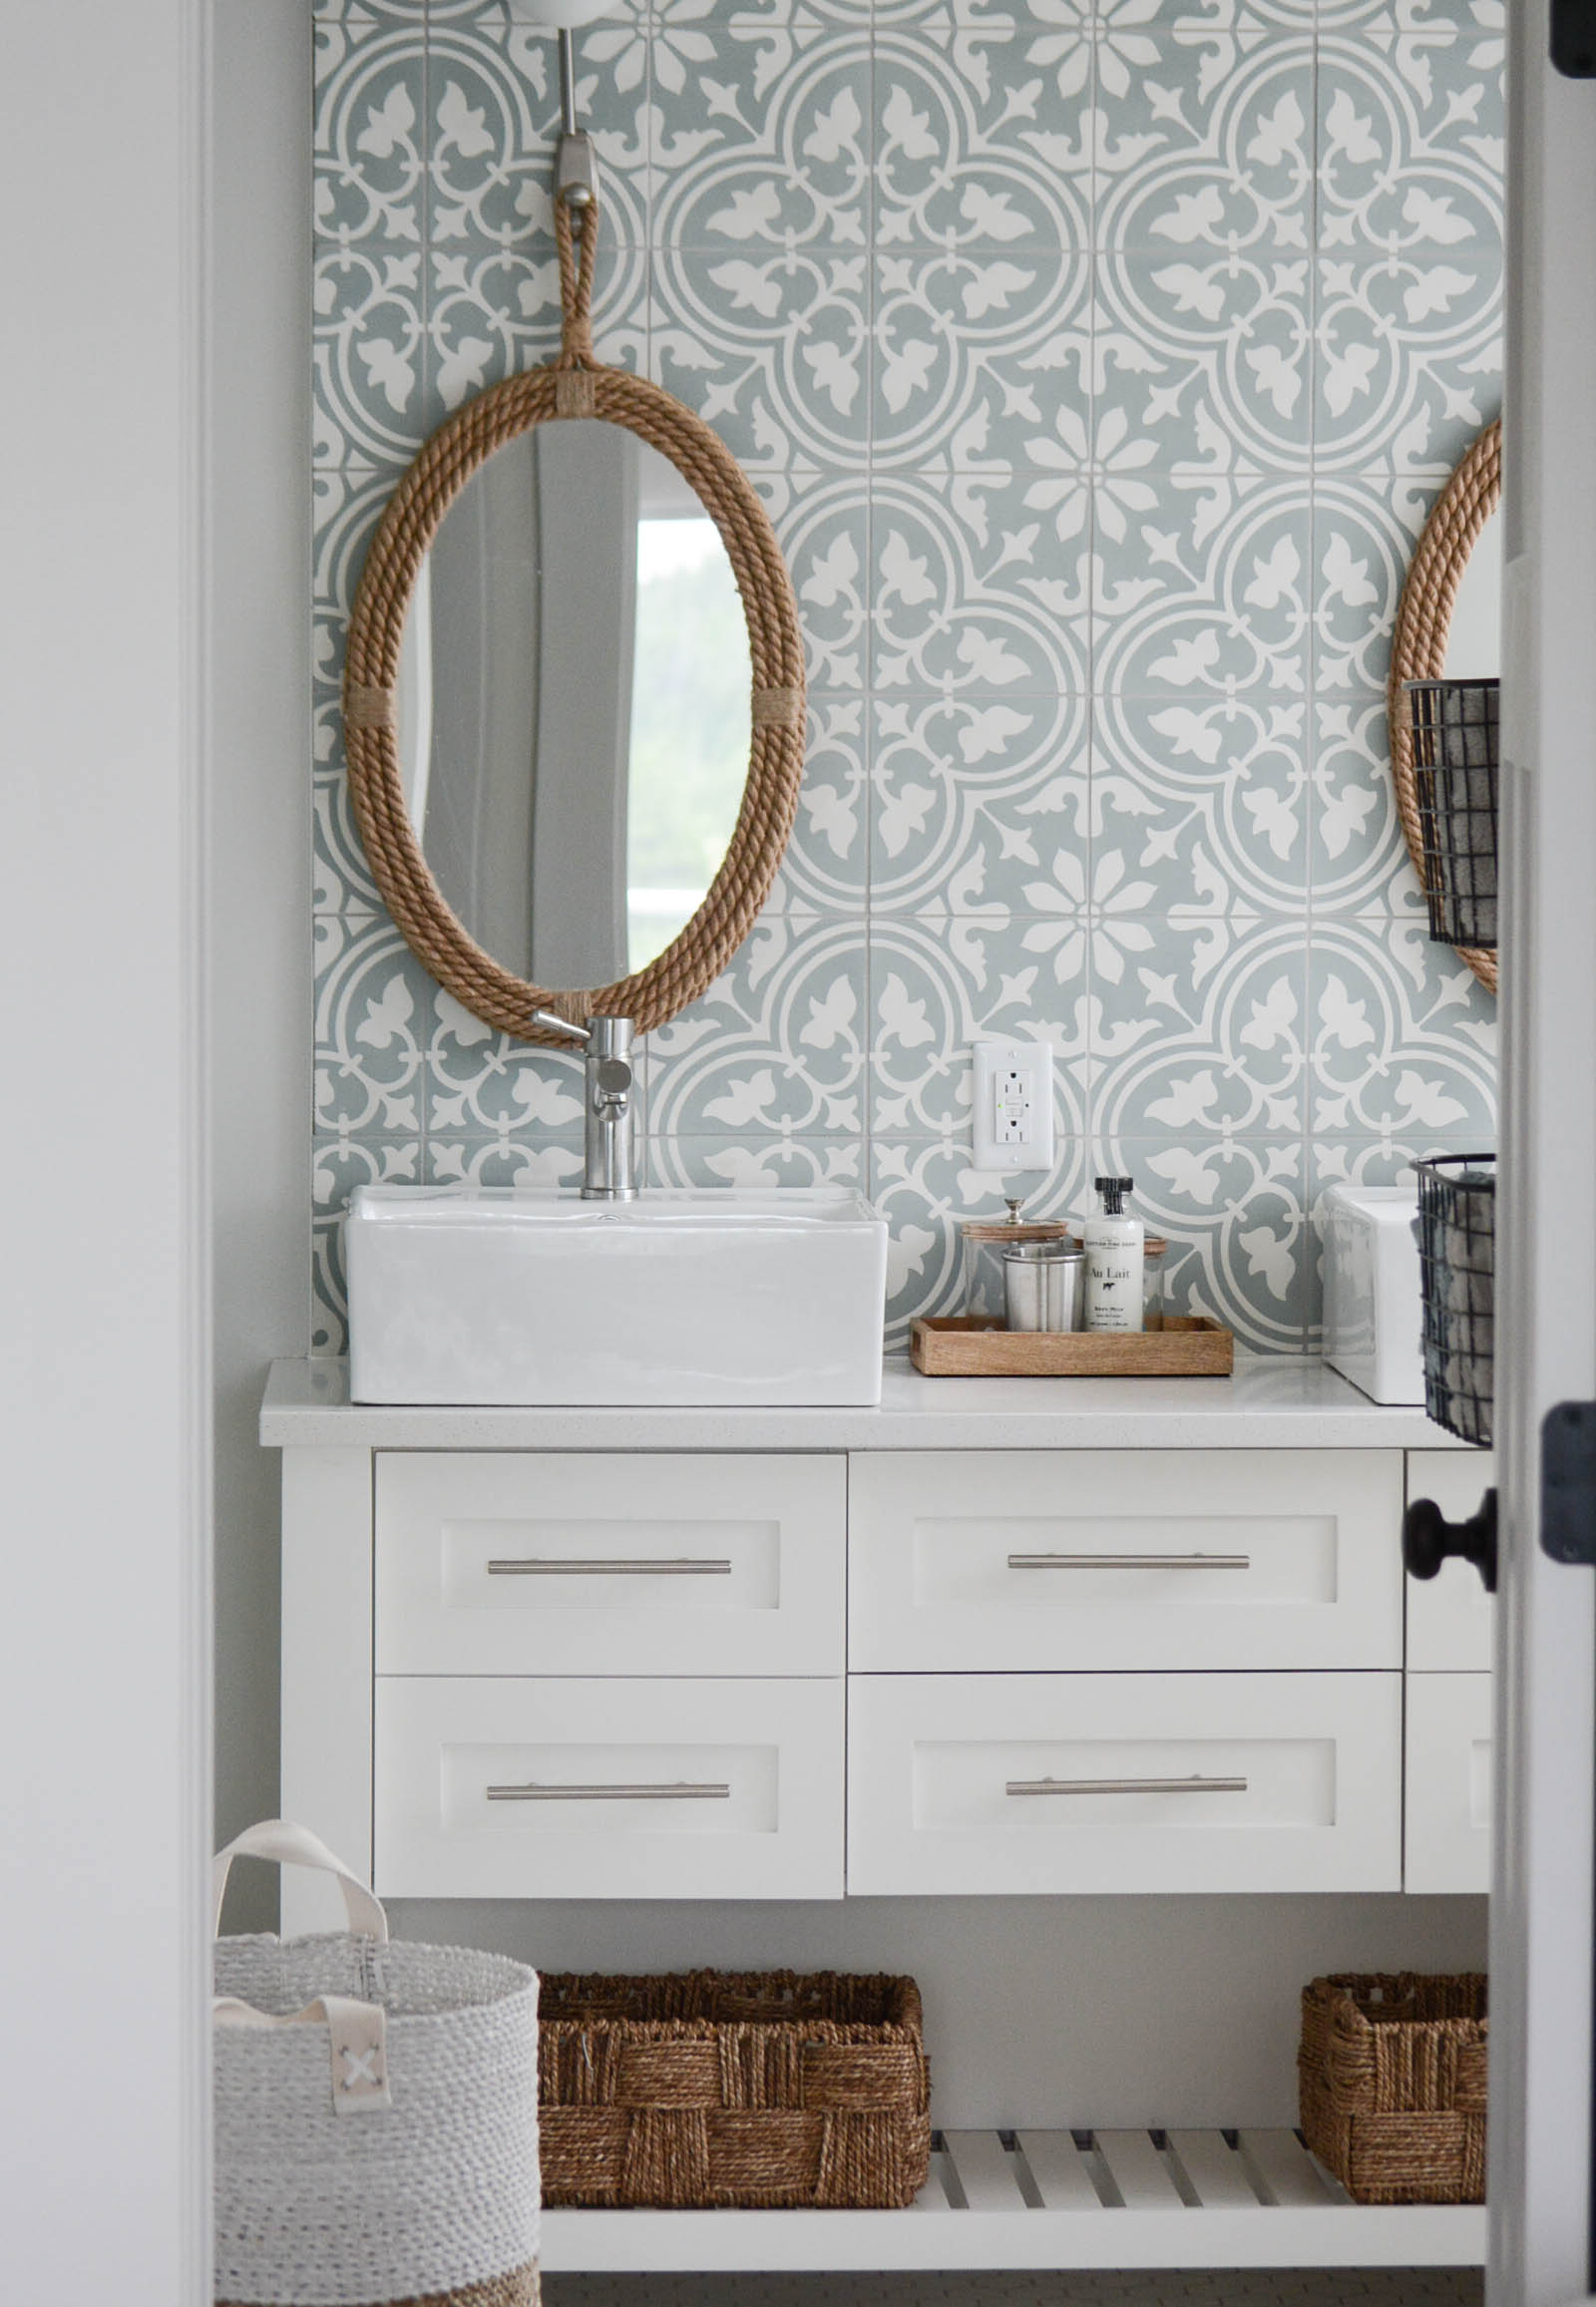 5 Things Your Modern Cottage Bathroom Needs